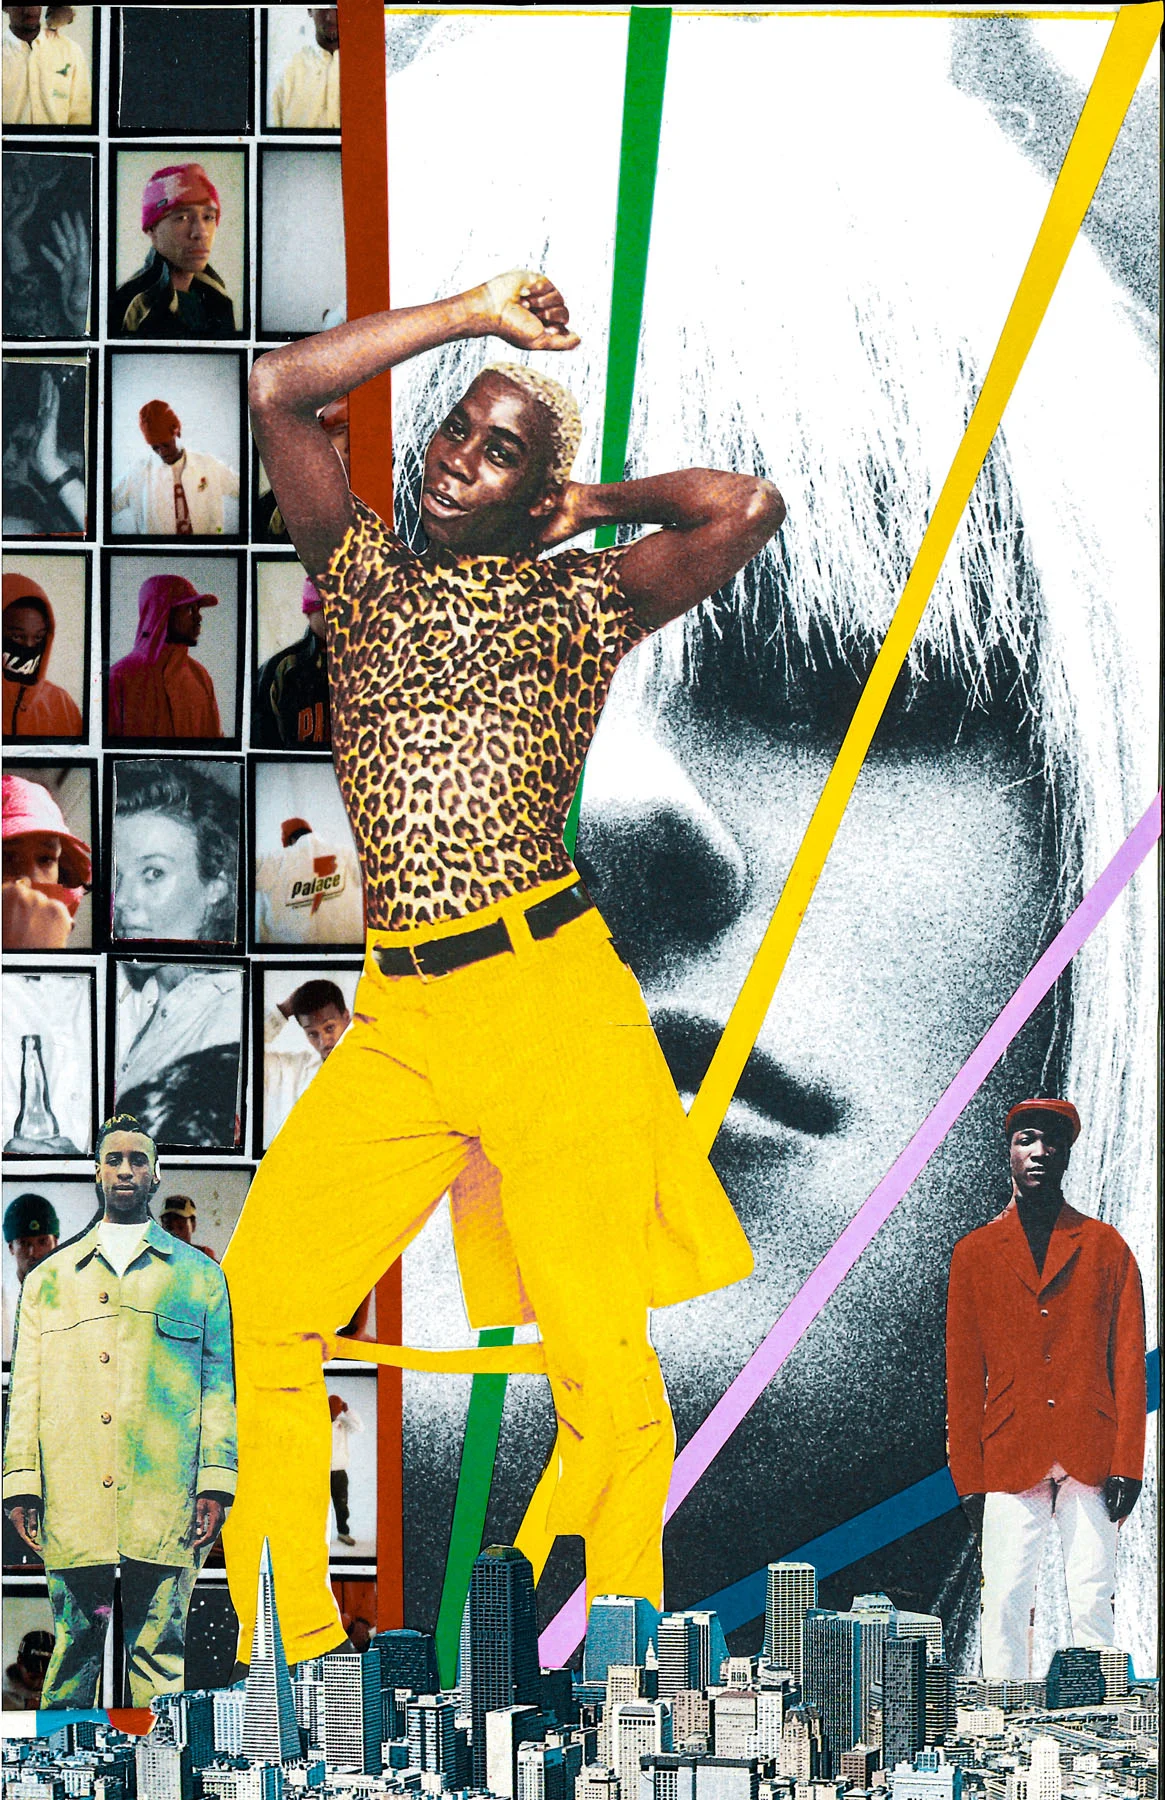 A collage with a black and white photo in the background, with a man wearing yellow pants, a leopard print shirt, and blonde hair posing in the center. Pink, yellow, green, and red strips of contruction paper are featured throughout the photo.